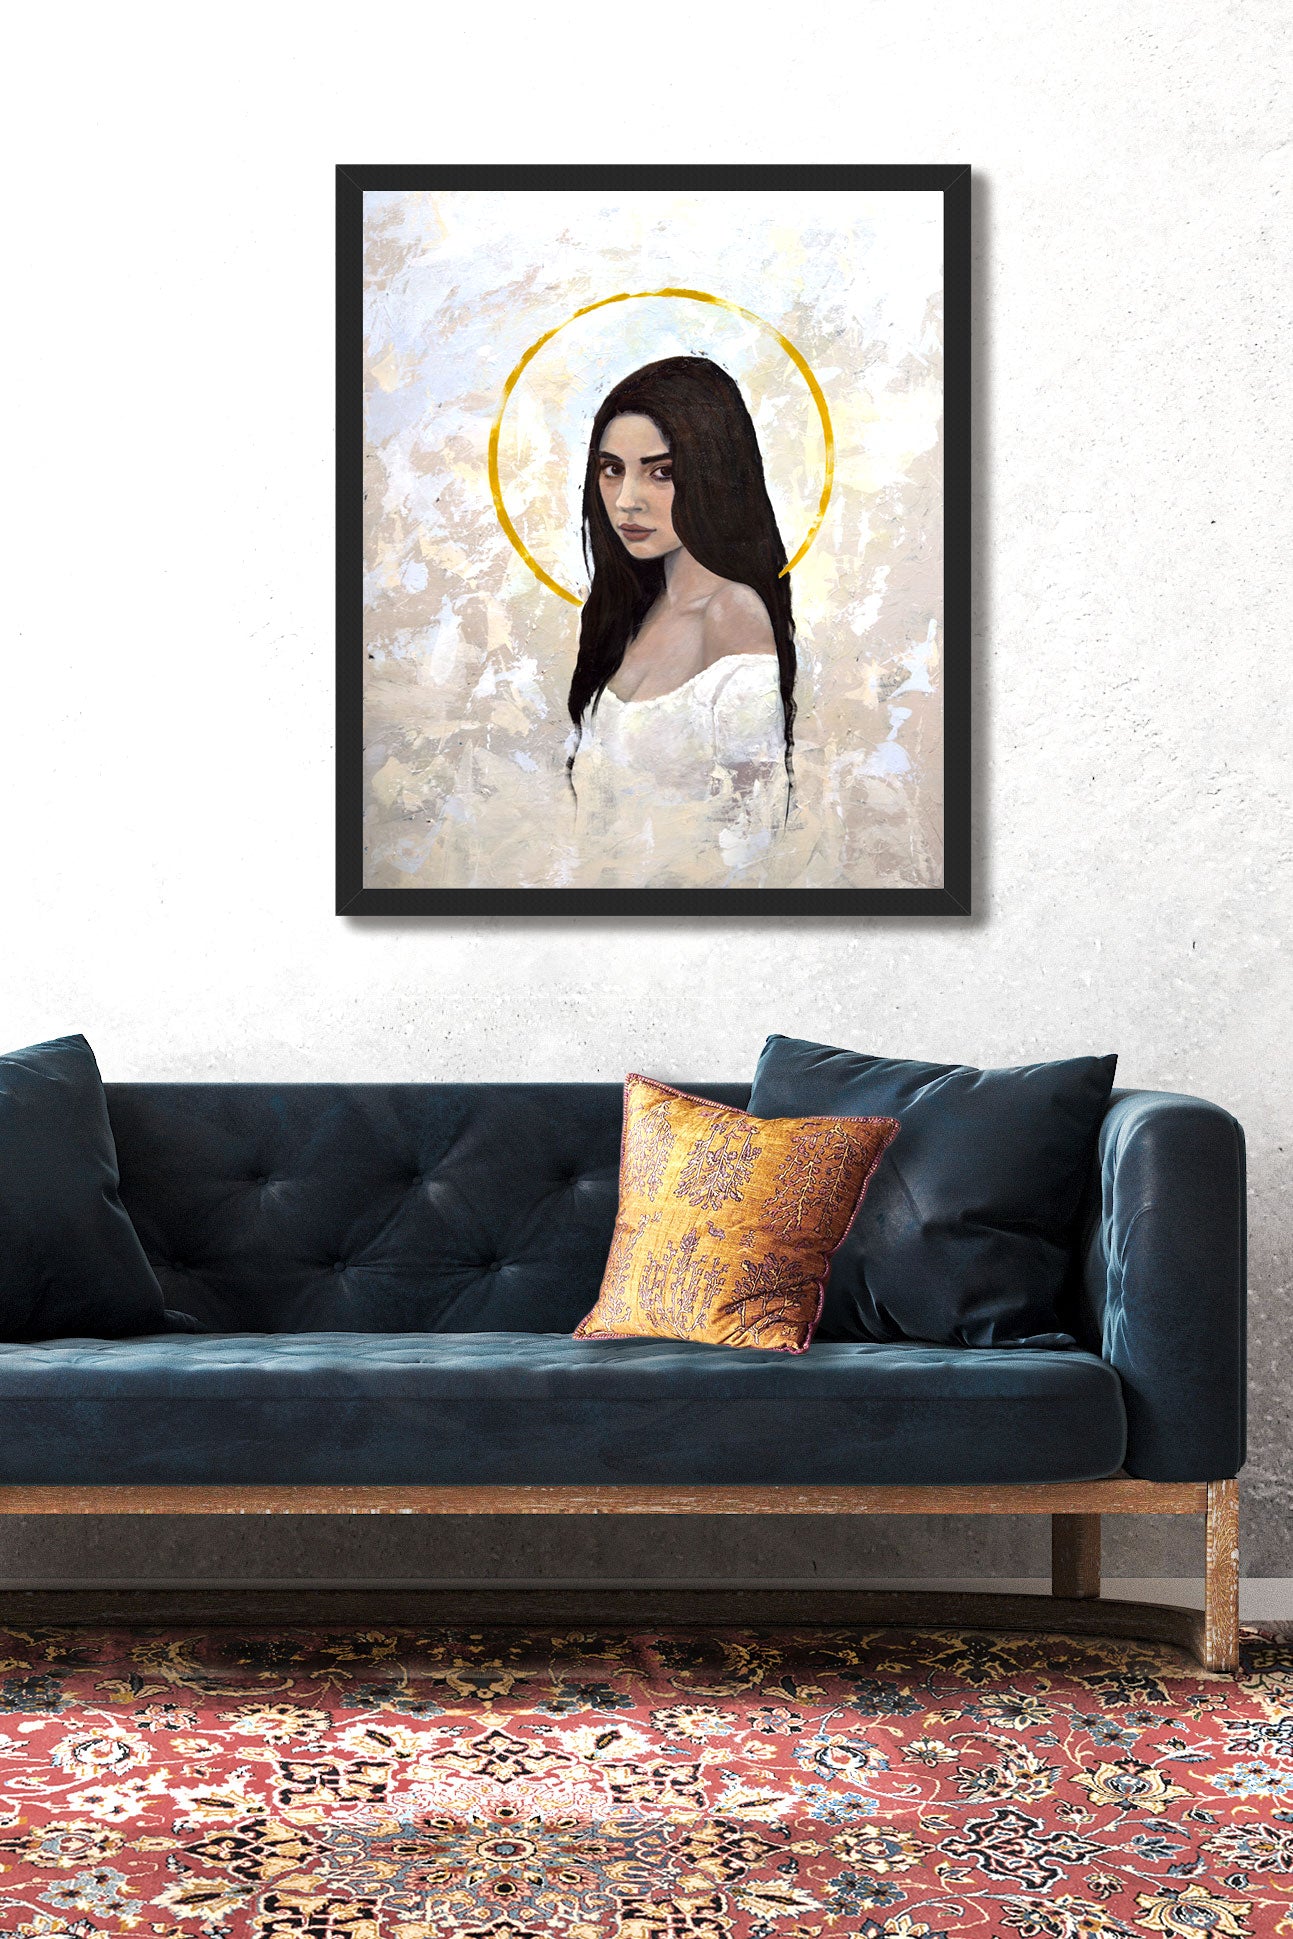 'Fascination' Portrait art print of woman with halo framed on wall